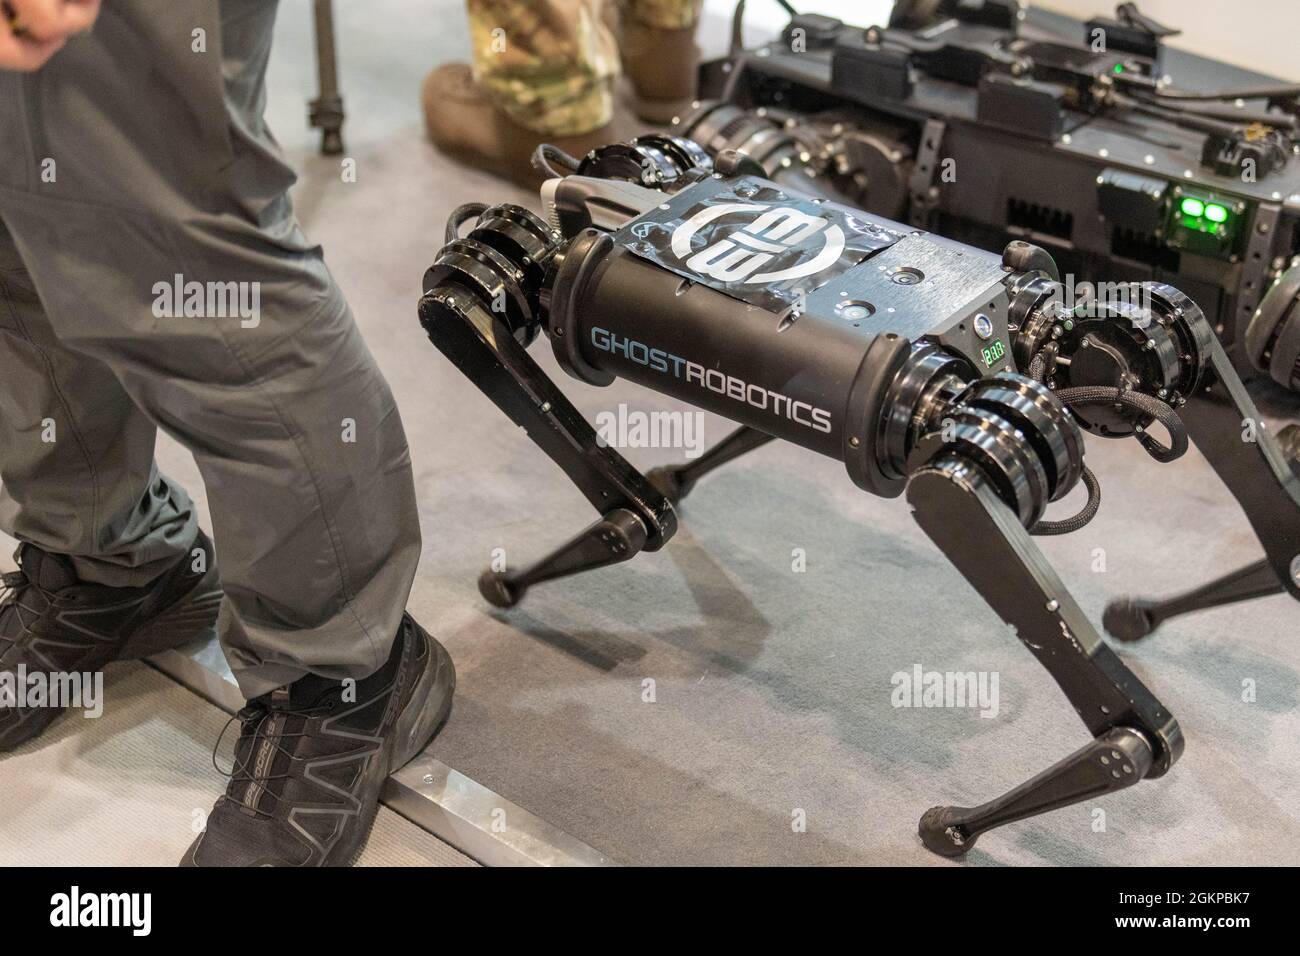 London, UK. 15th Sep, 2021. DSEI (Defence Security Equipment International) exhibition at the Excel Centre London Robotic dog Credit: Ian Davidson/Alamy Live News Stock Photo